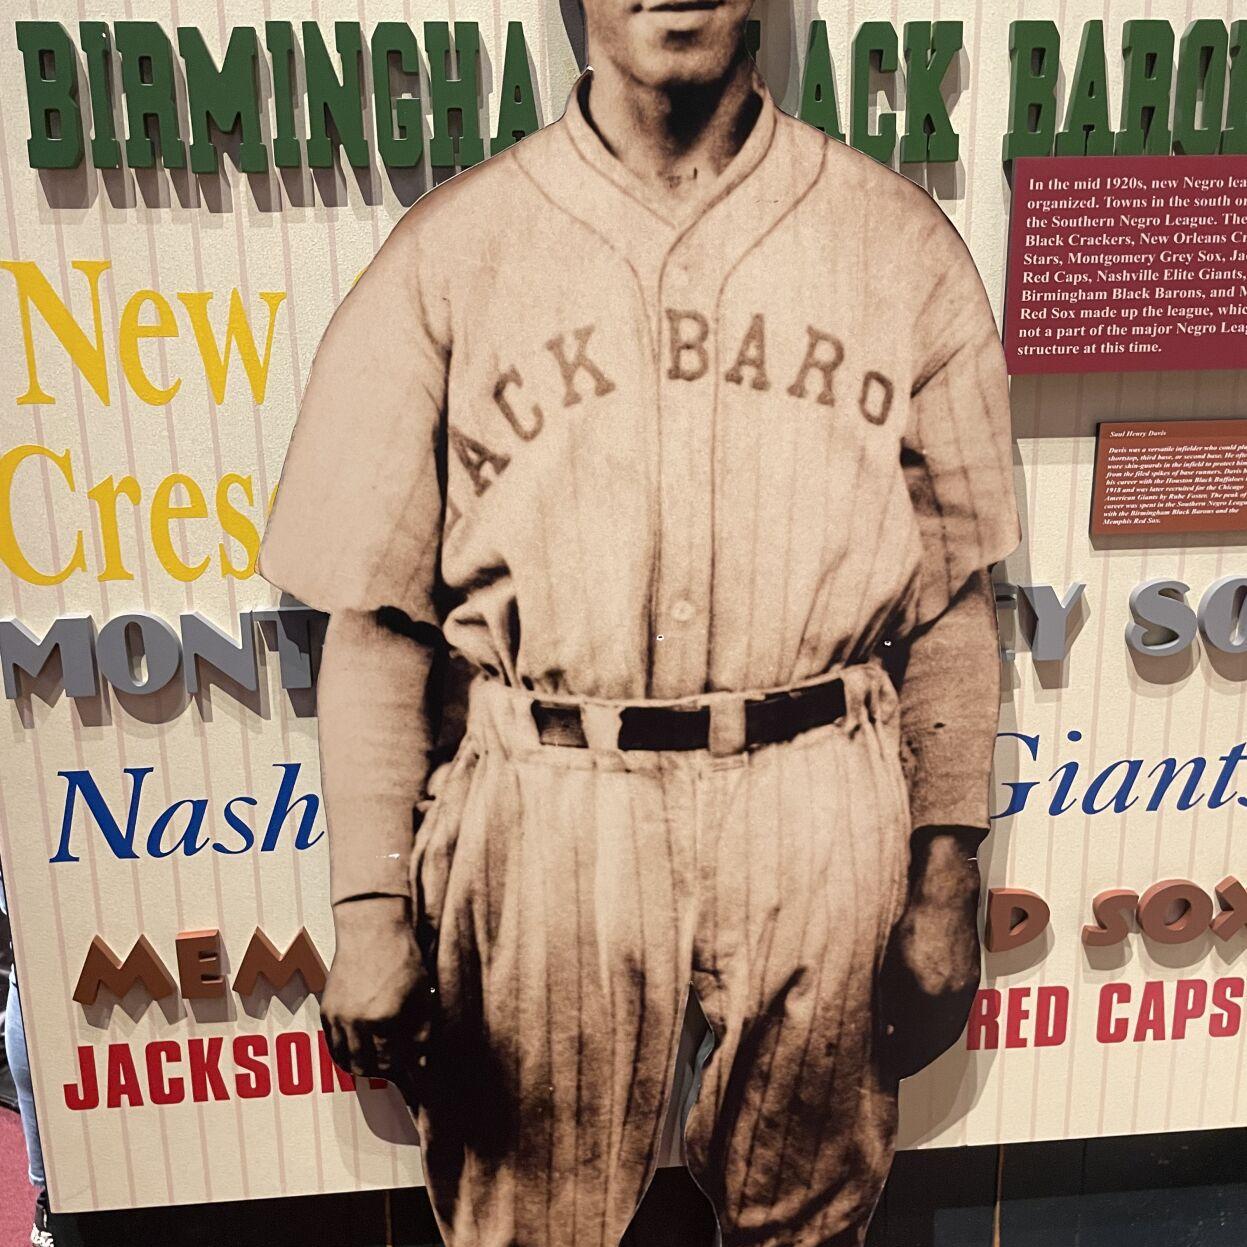 The largest Negro League card collection